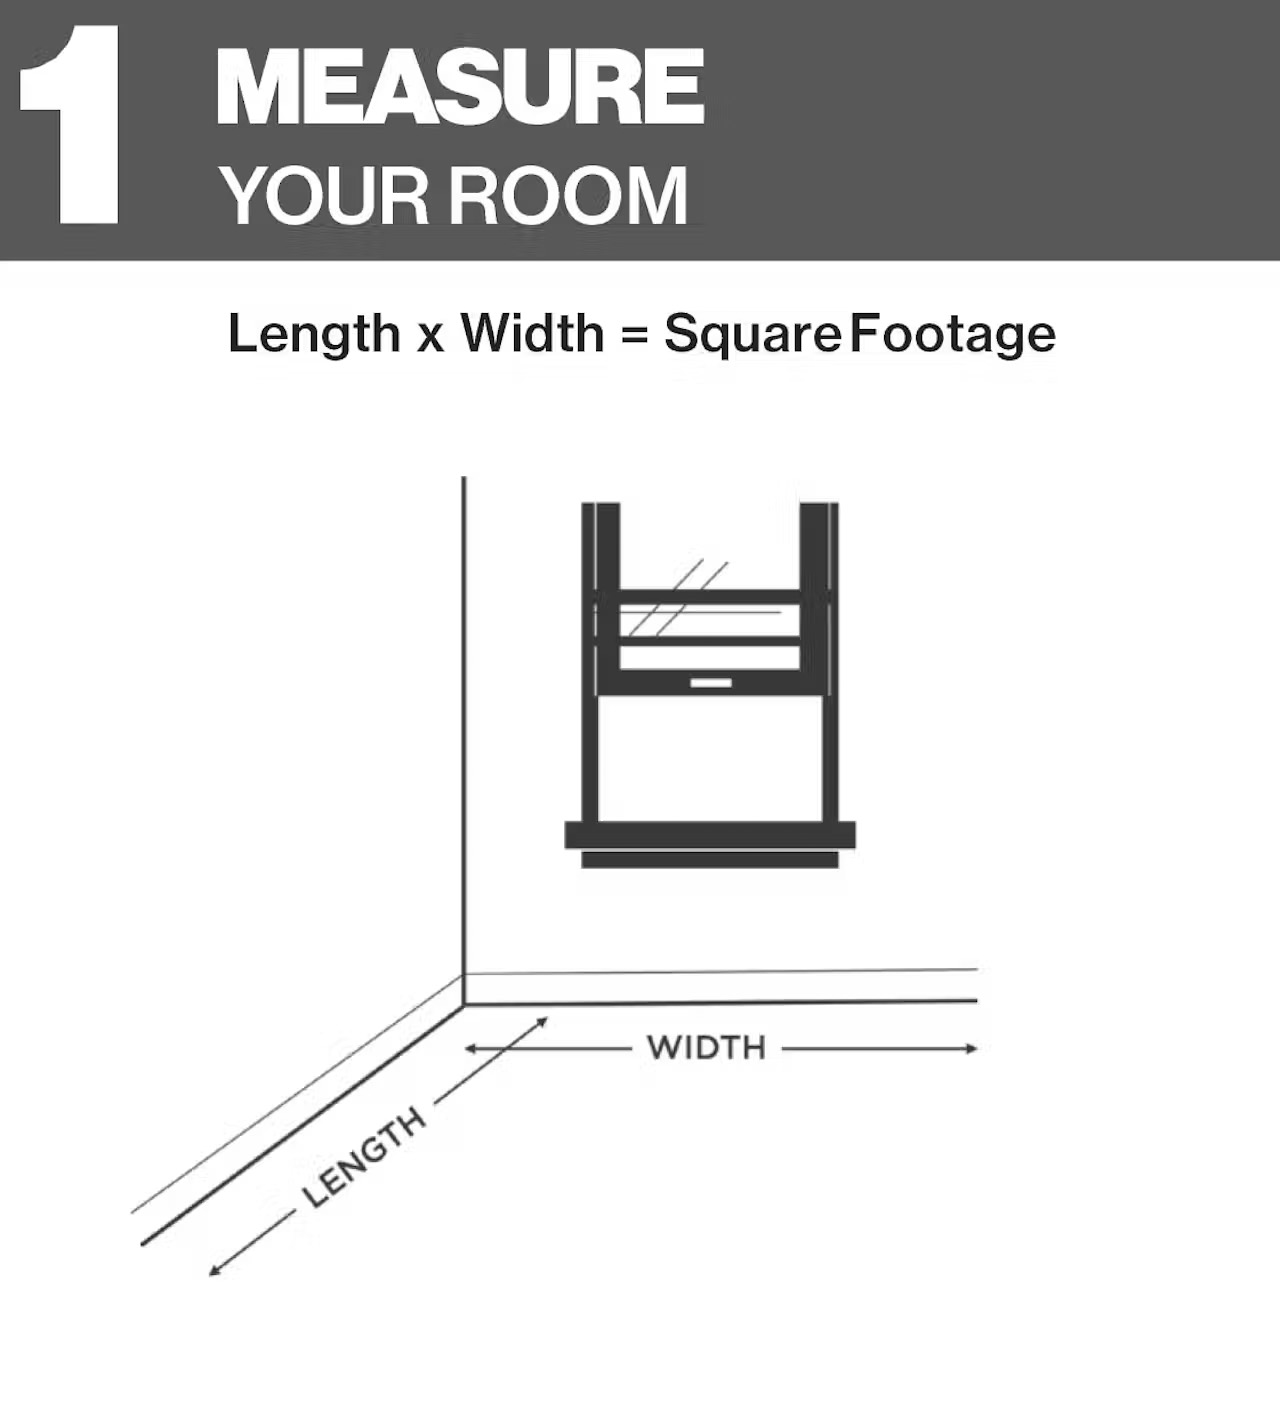 Diagram for how to measure your room. Length times width equals square footage.